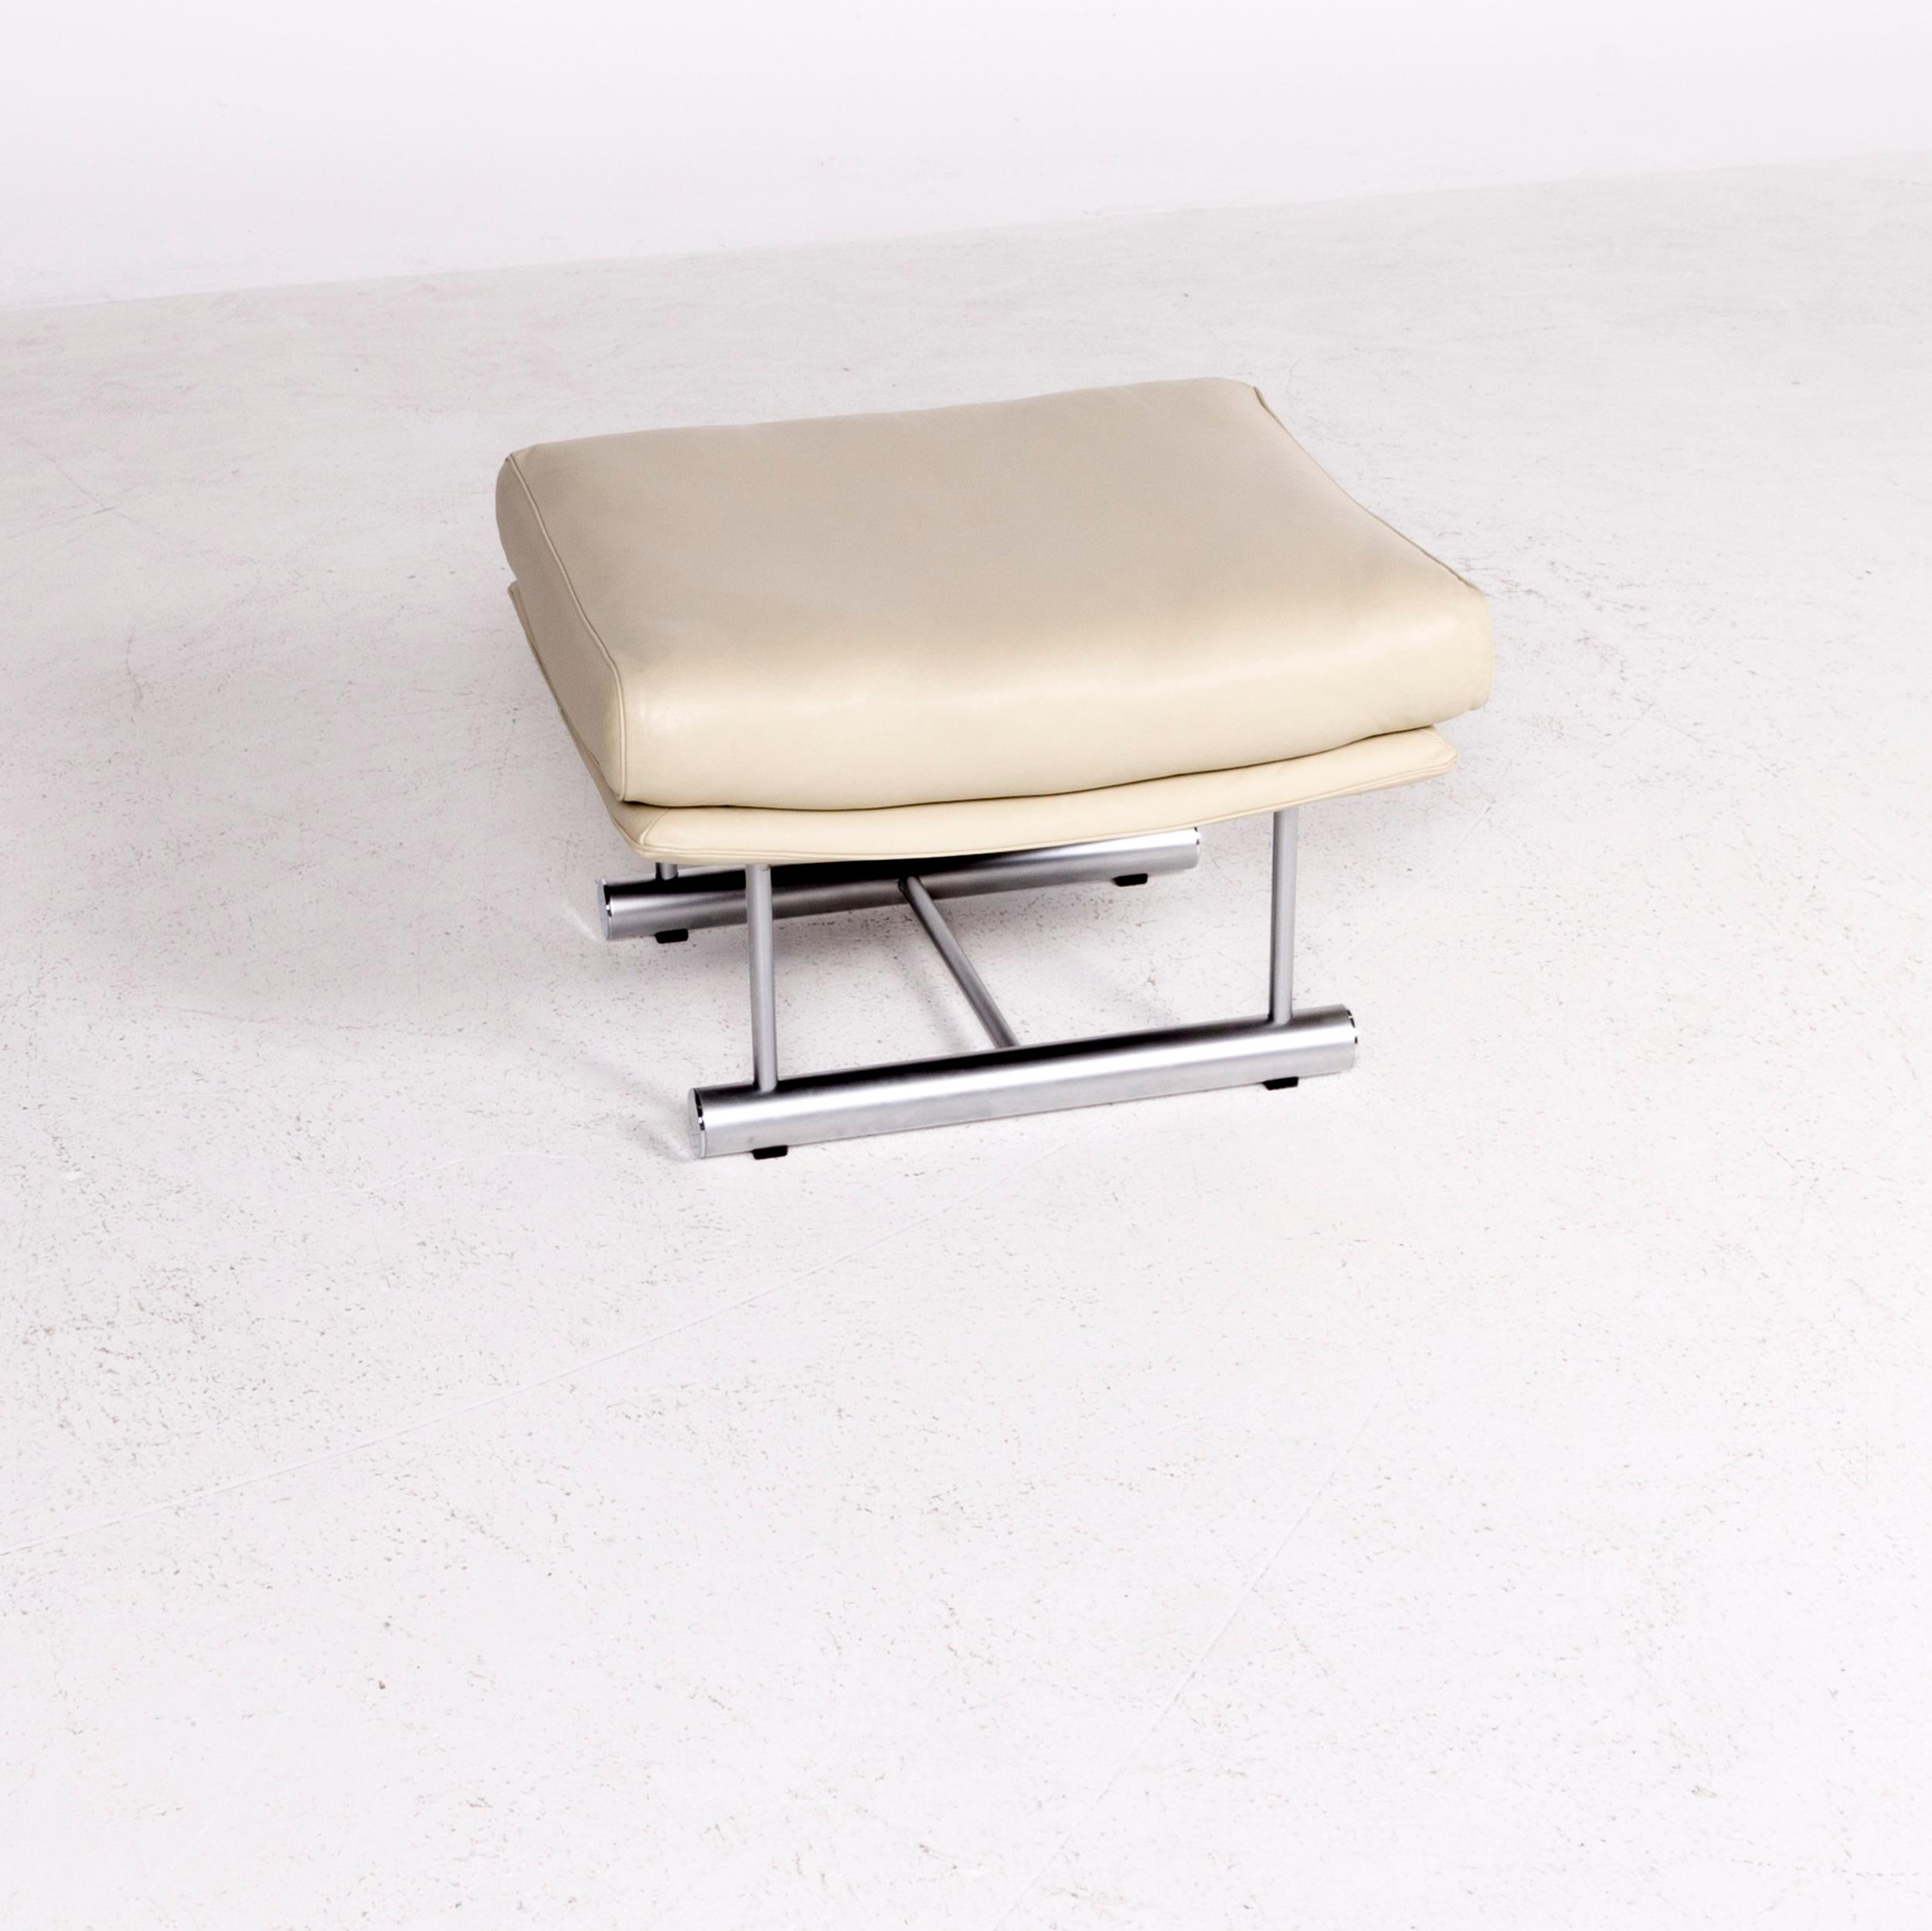 We bring to you a Rolf Benz designer leather stool beige genuine leather stool.

Product measurements in centimeters:

Depth 59
Width 61
Height 41.





 